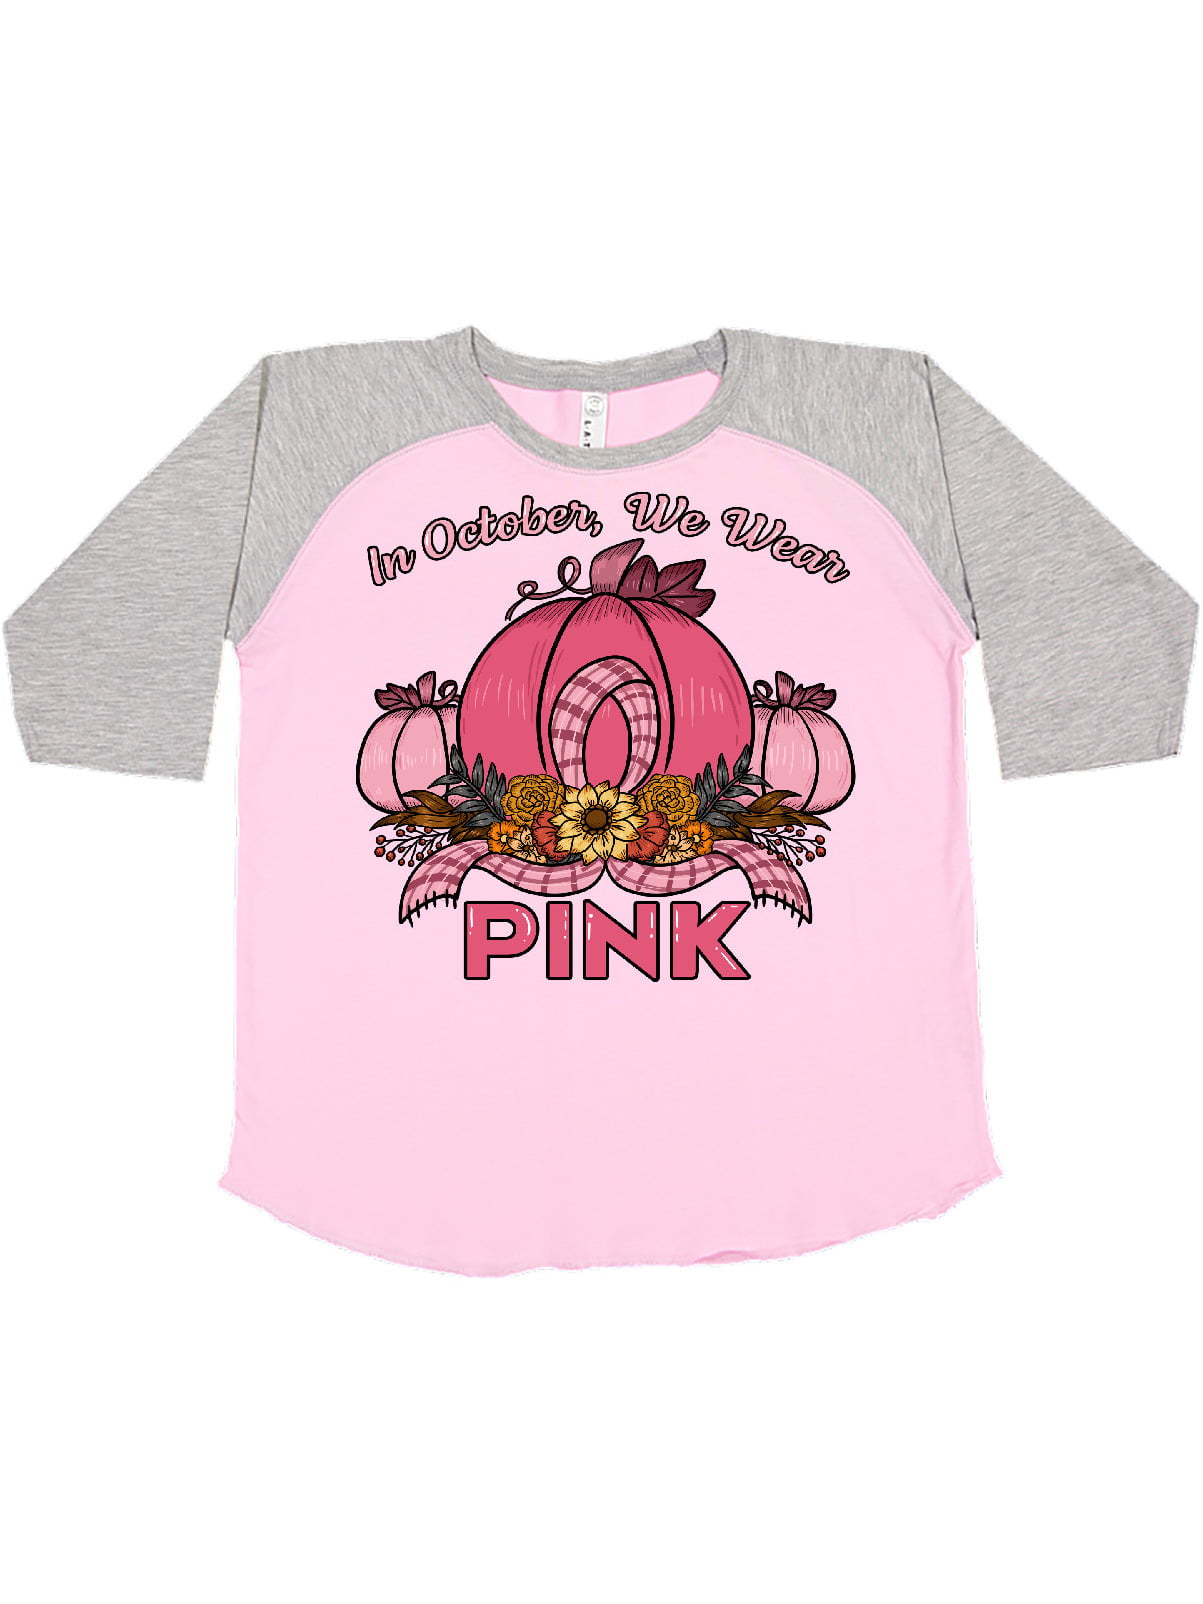 In October We Wear Pink Breast Cancer Awareness Month Short-Sleeve Unisex T-Shirt